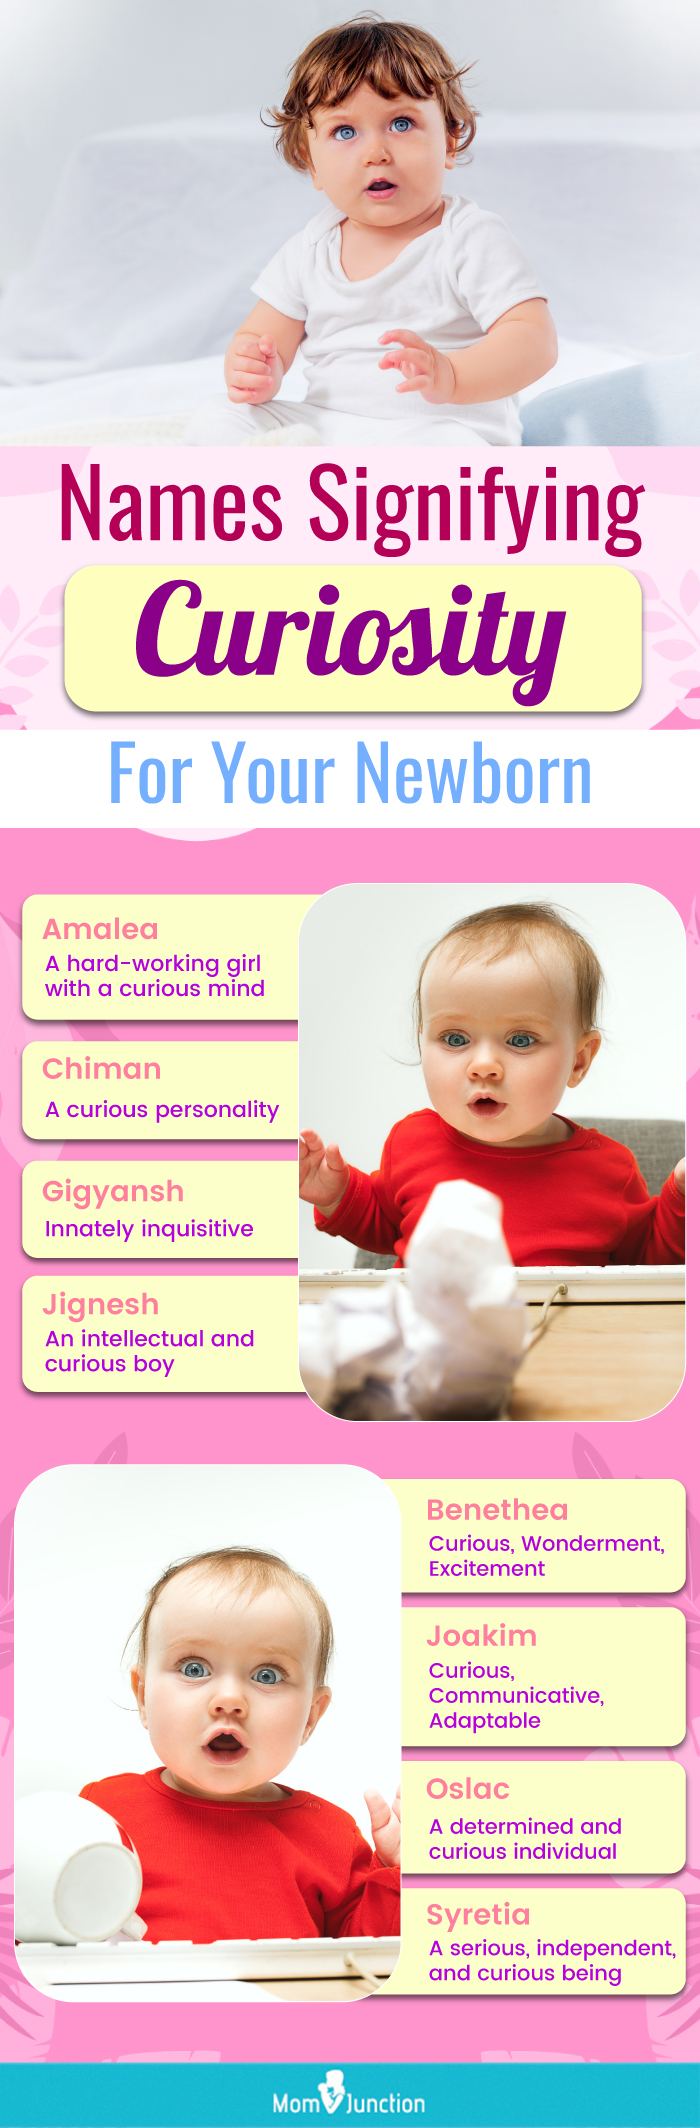 names signifying curiosity for your newborn (infographic)